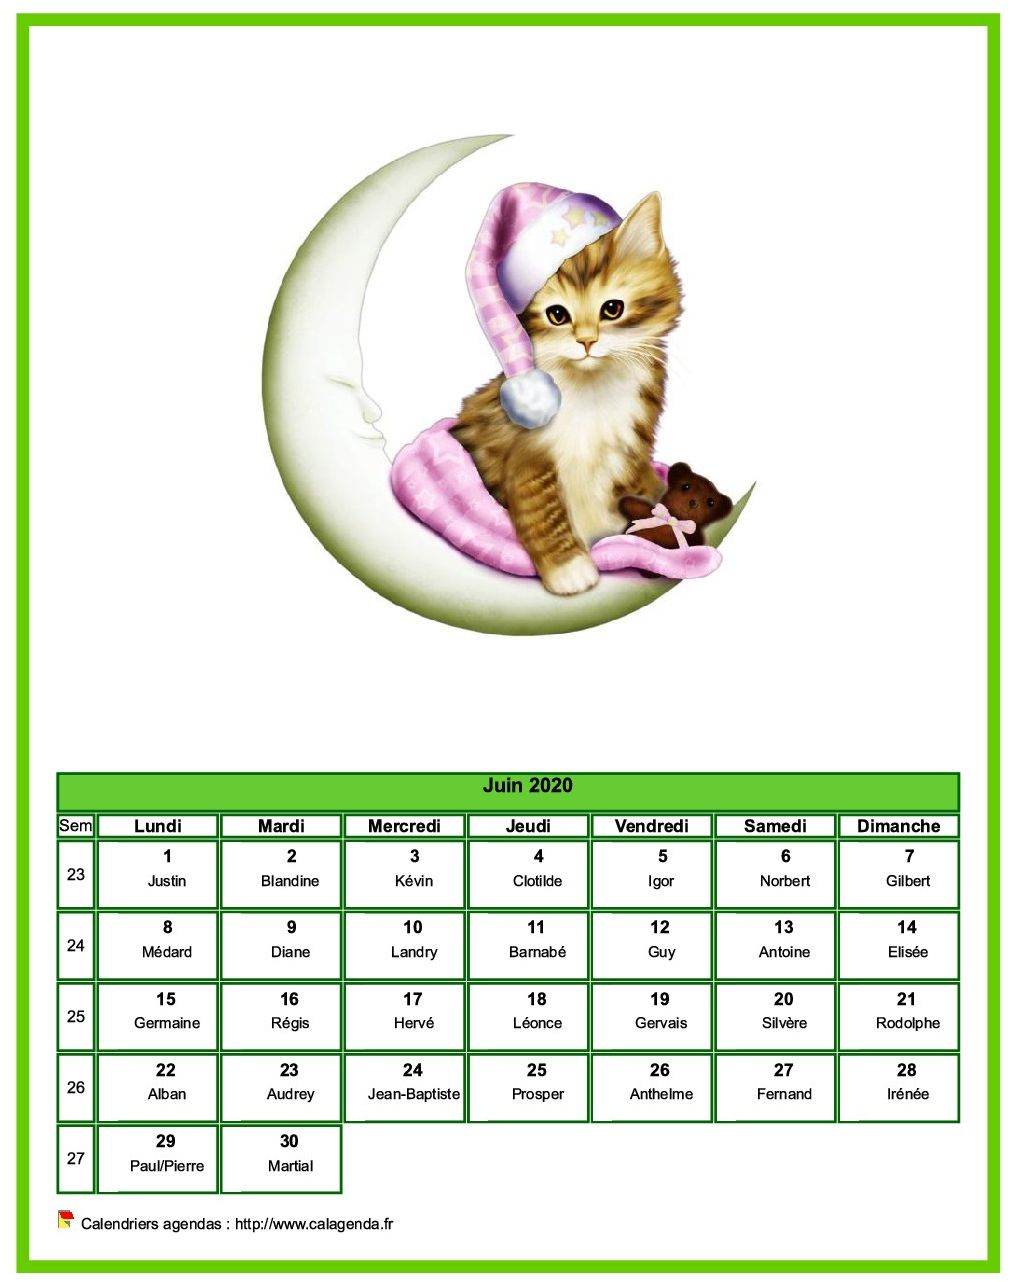 Calendrier juin 2020 chats